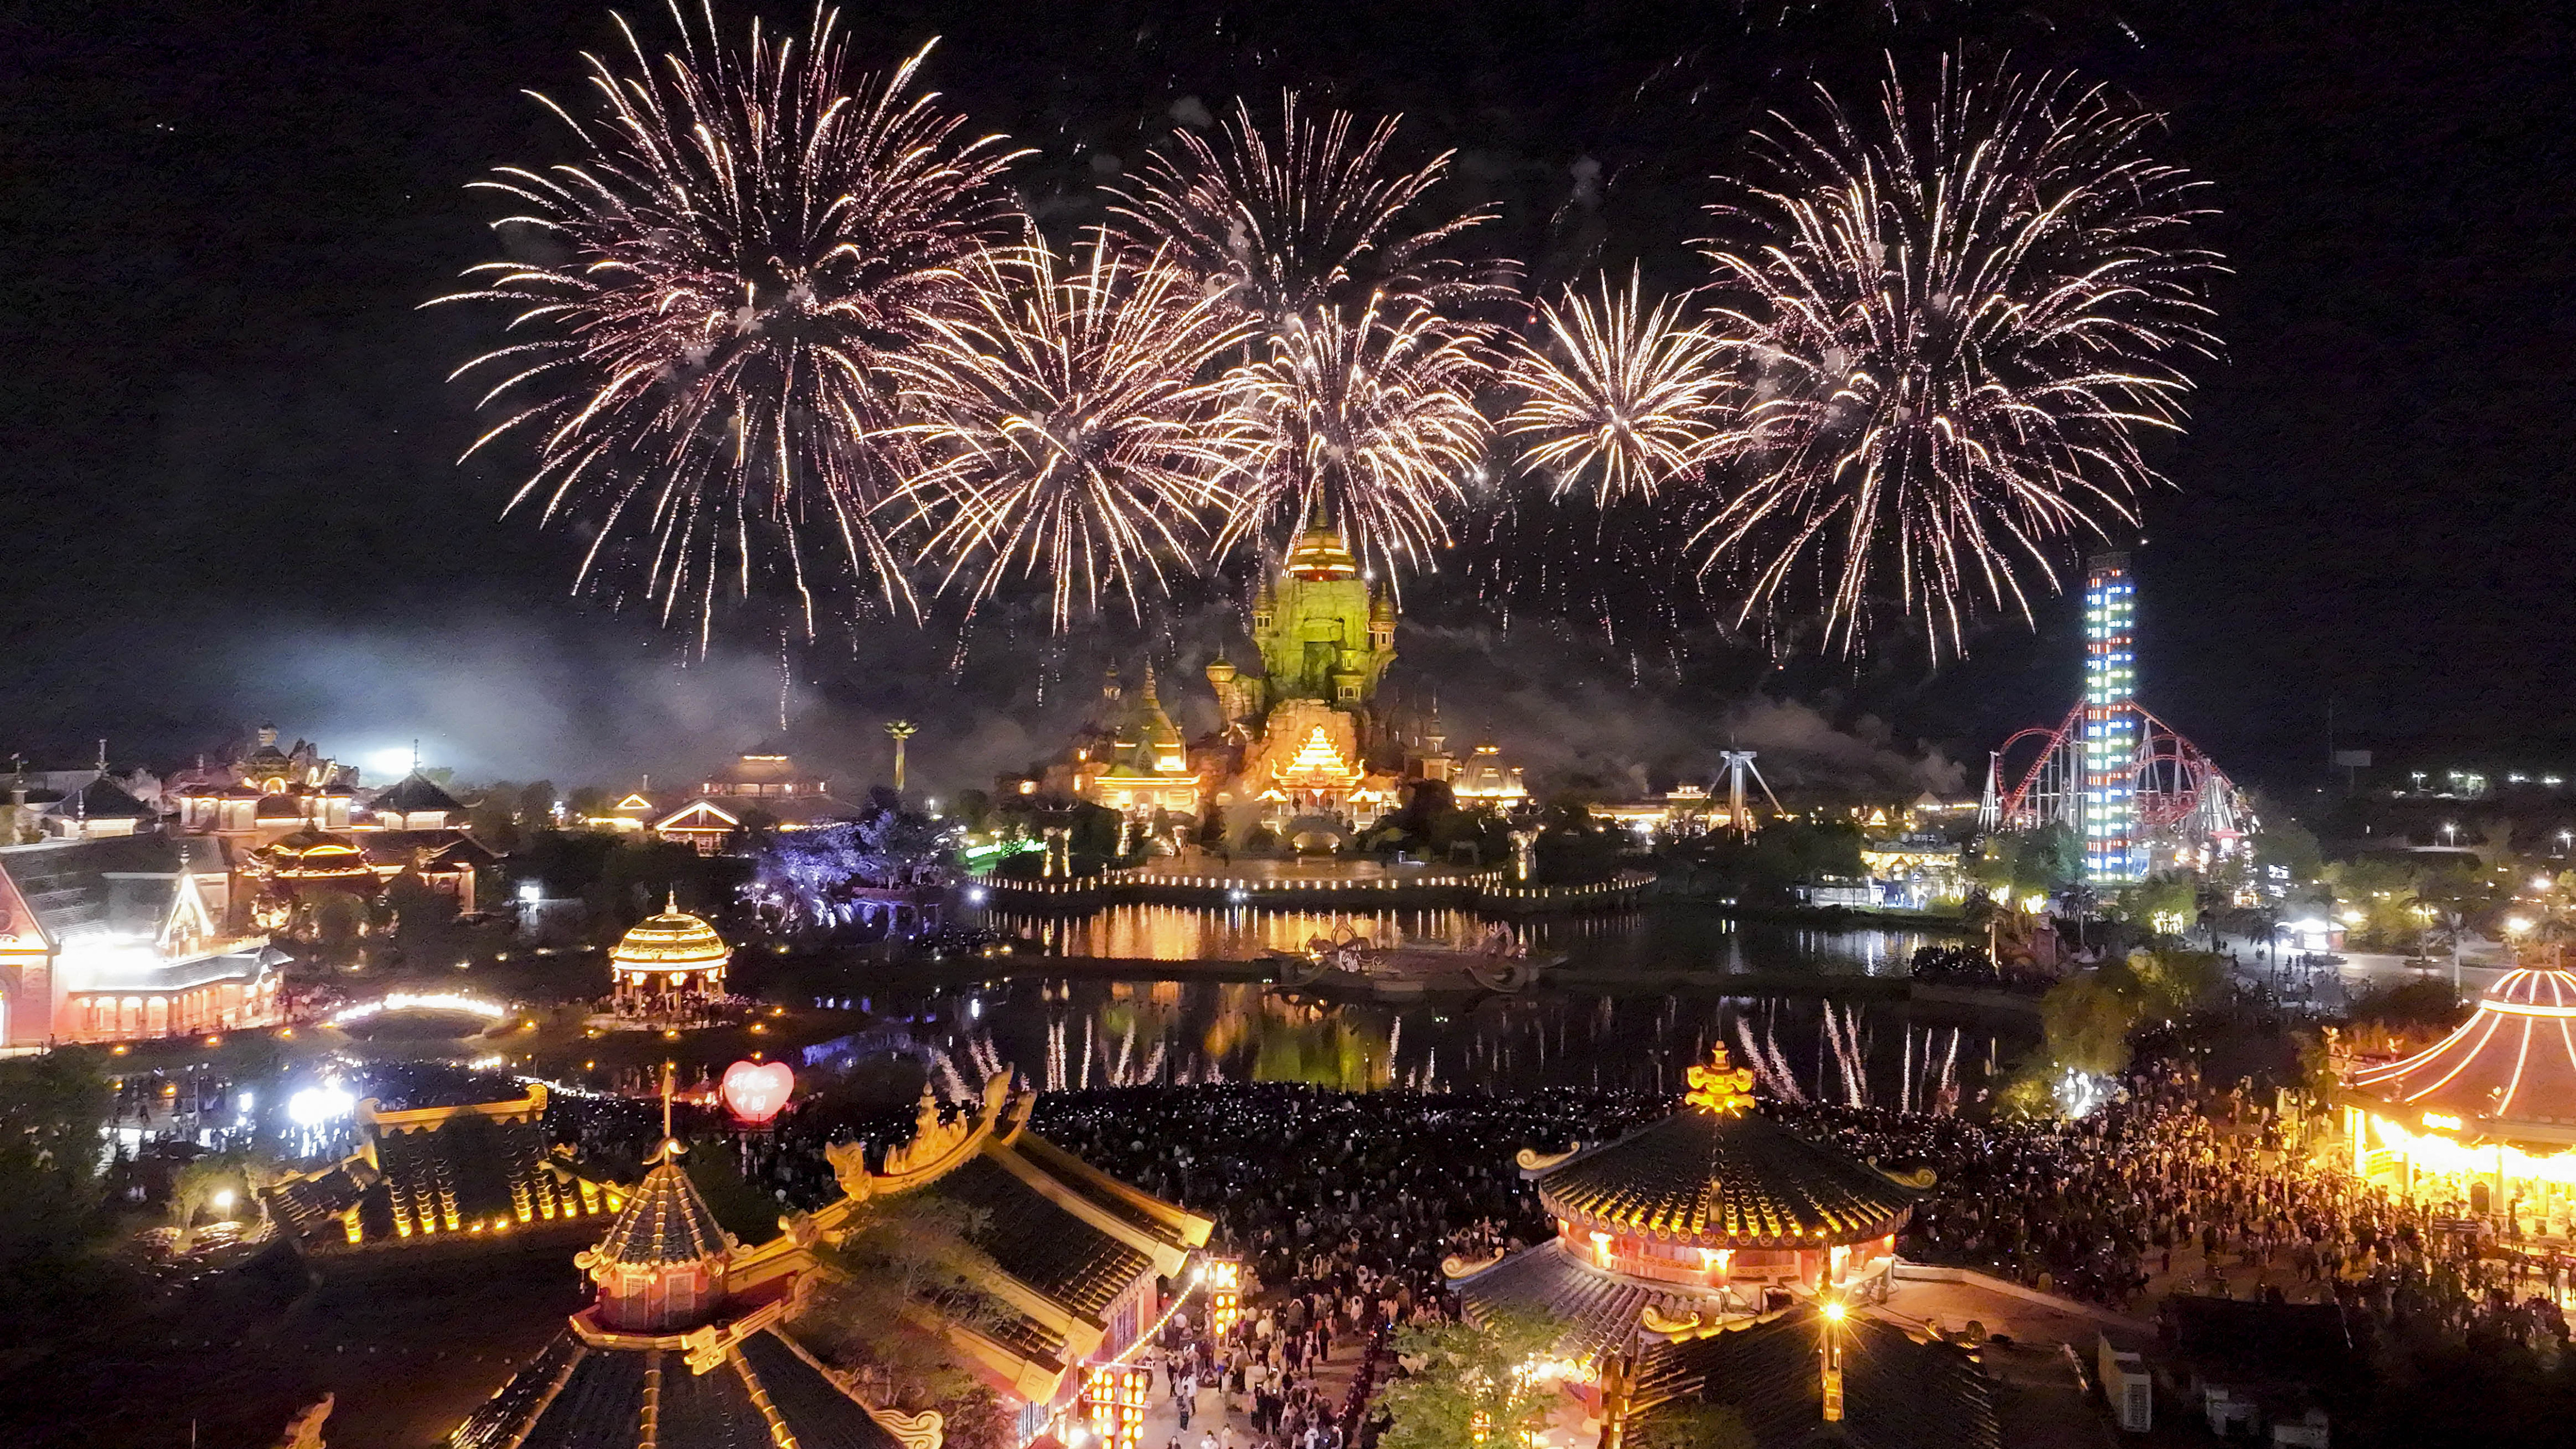 A fireworks show in the theme park 